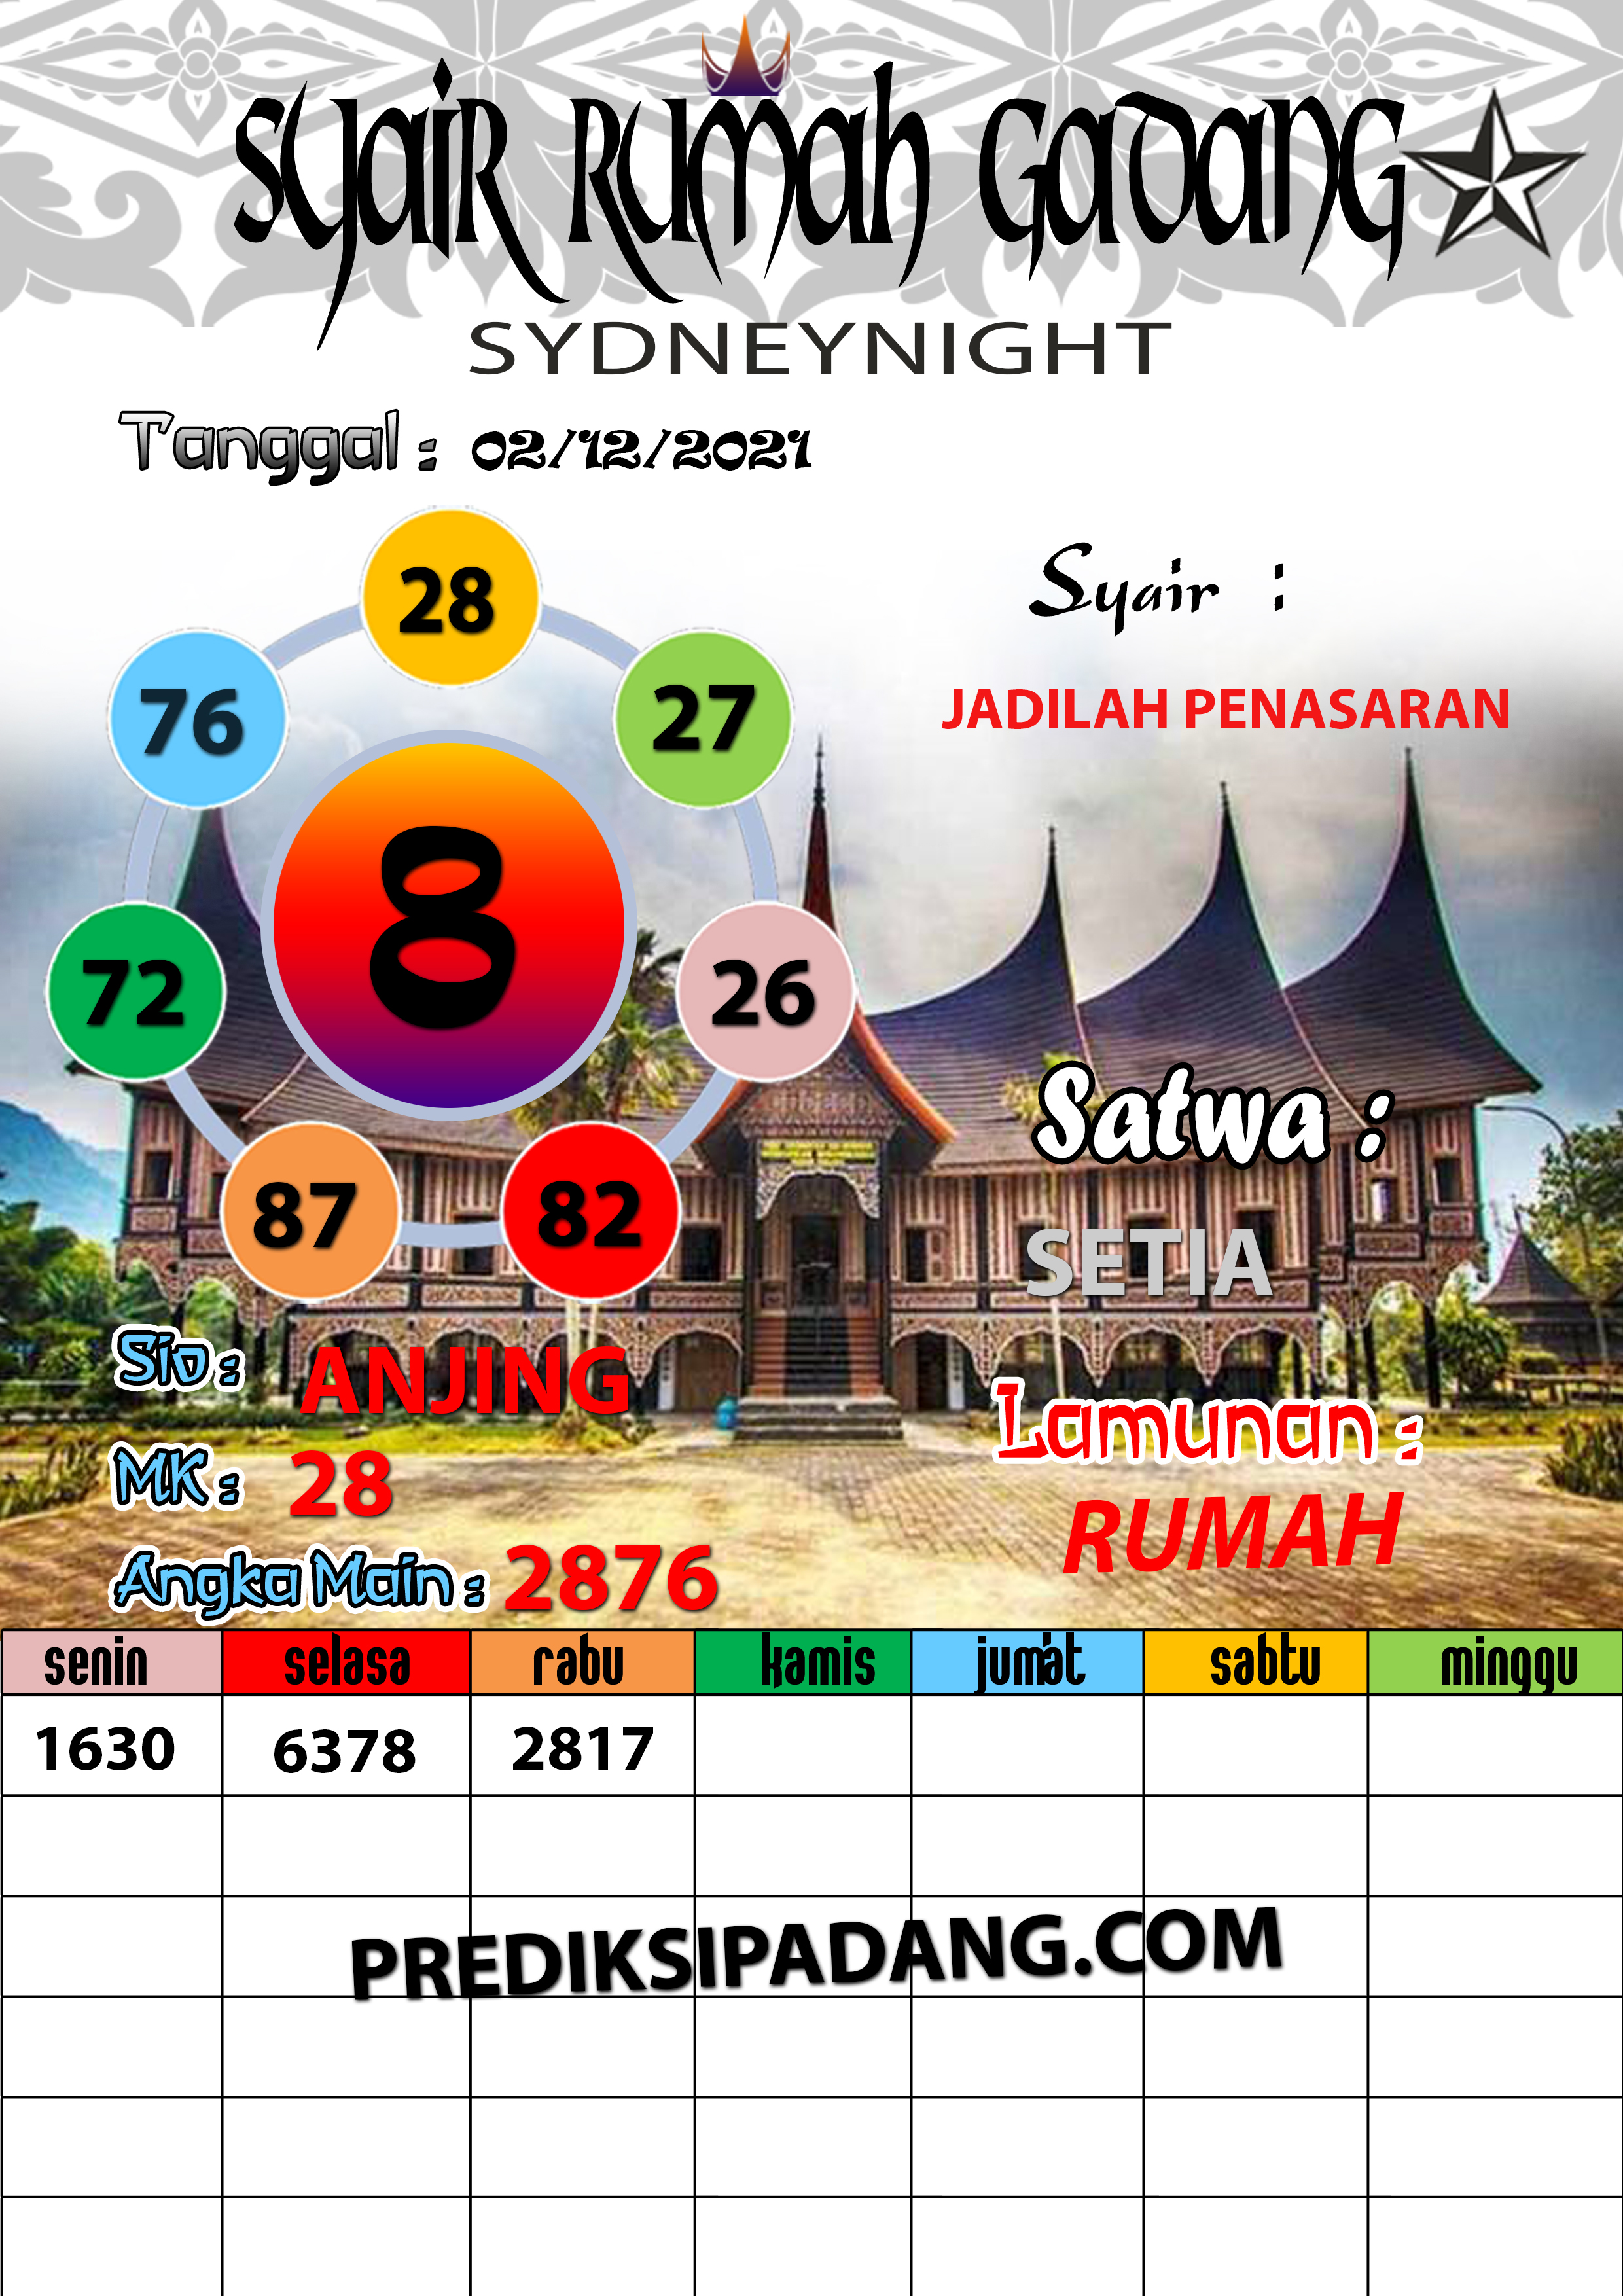 PADANG%20TOTO%20SIDNEYNIGHT-Recovered-Recovered%282%29.jpg